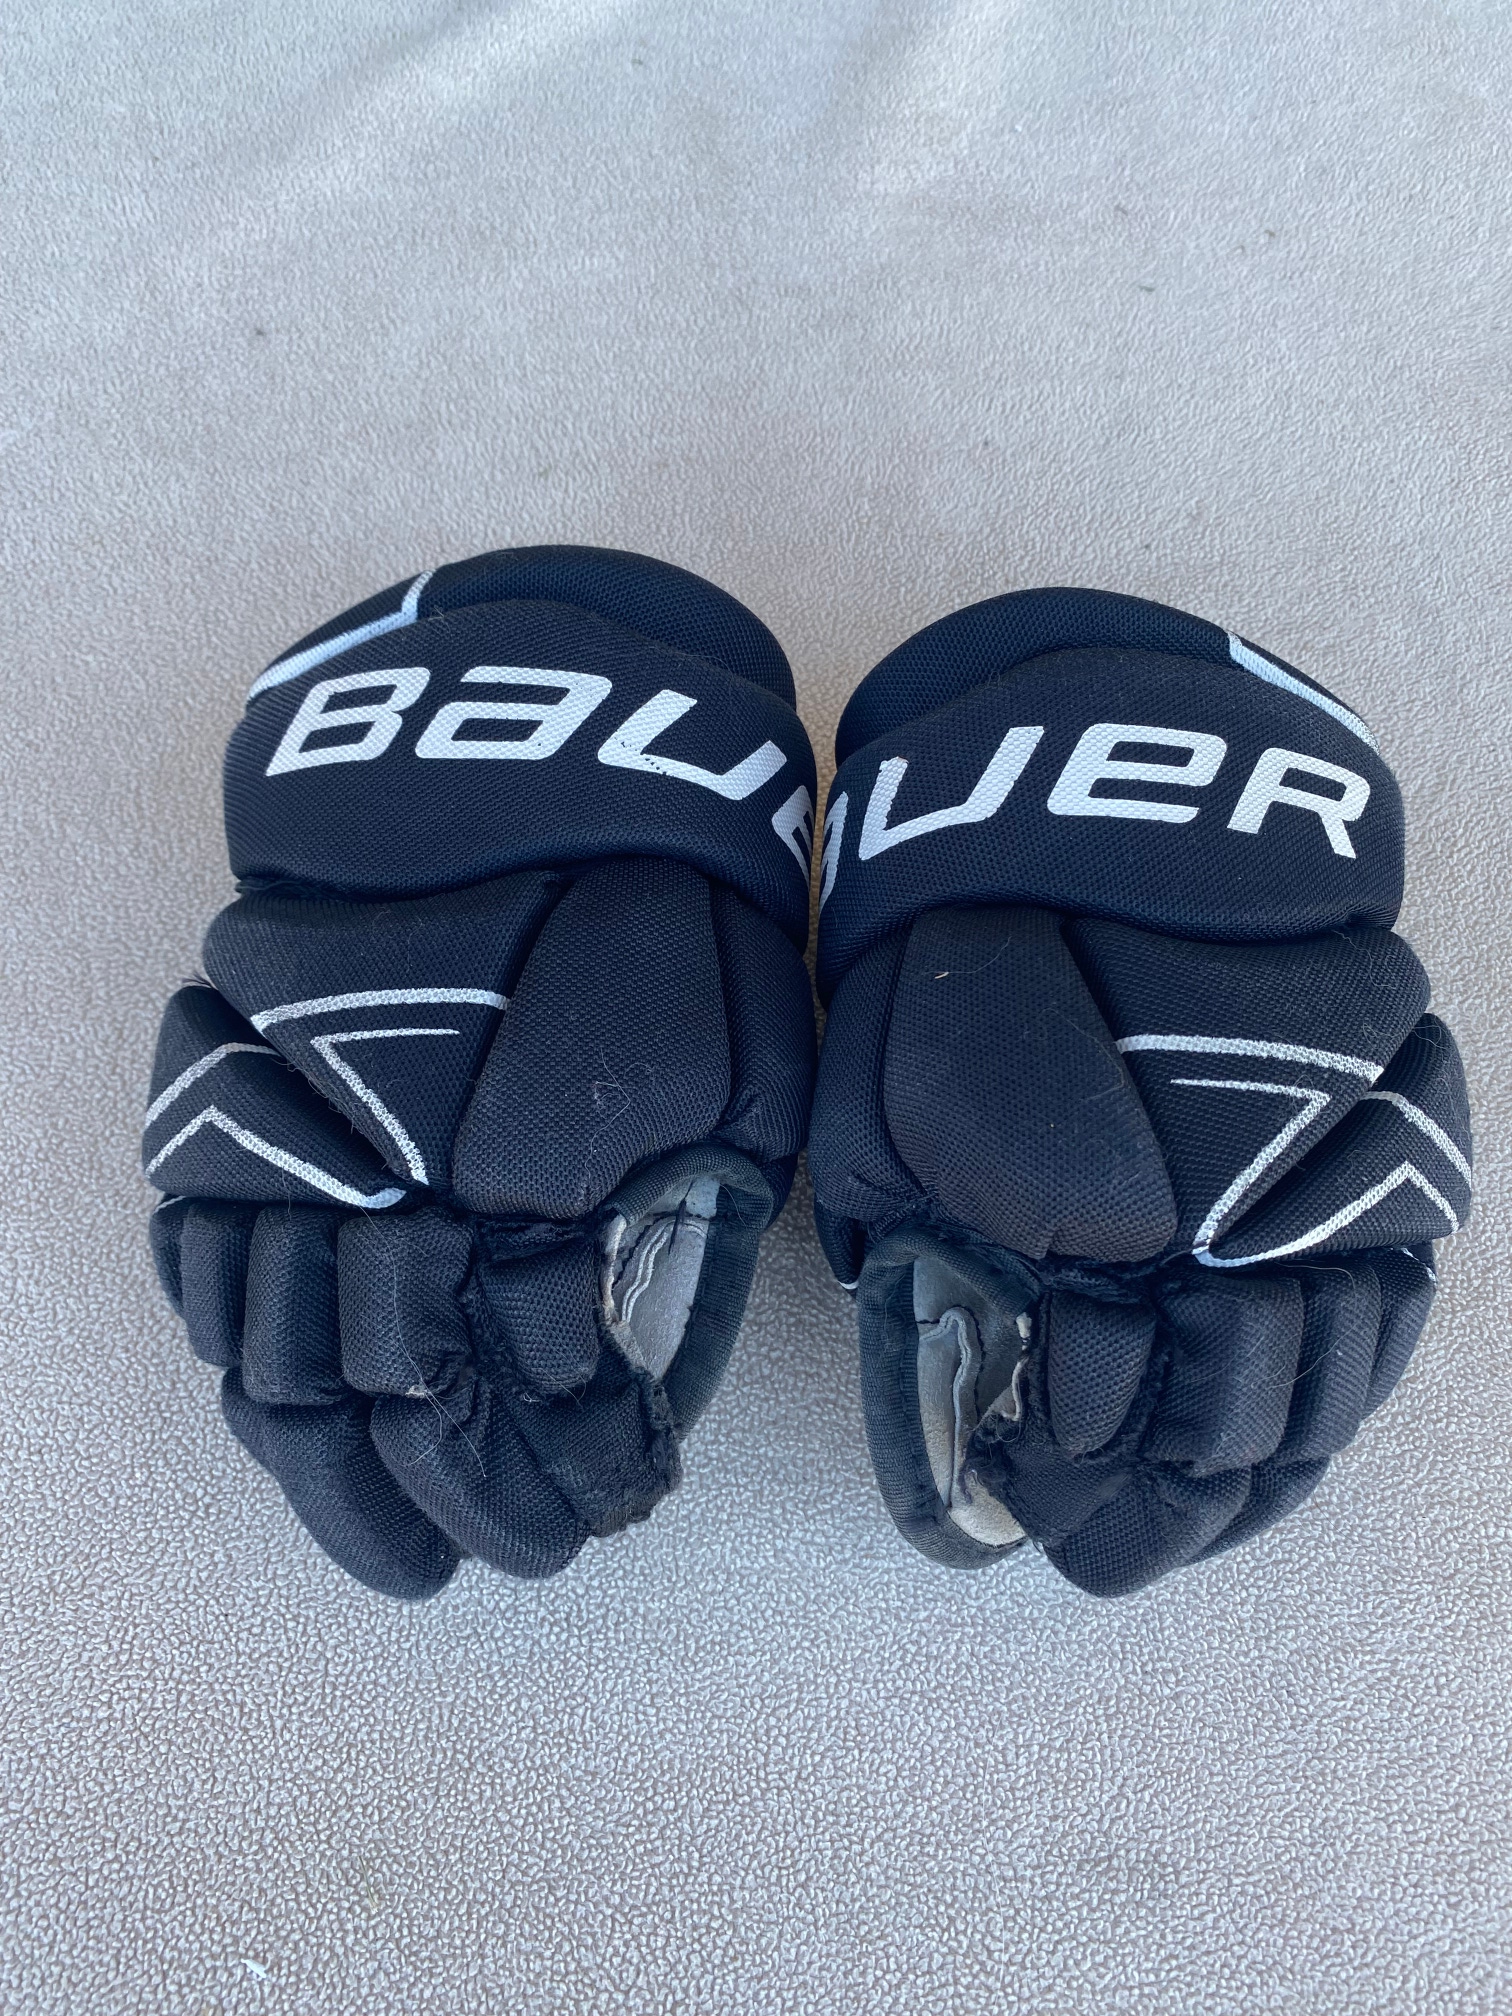 Used Bauer Gloves 8"